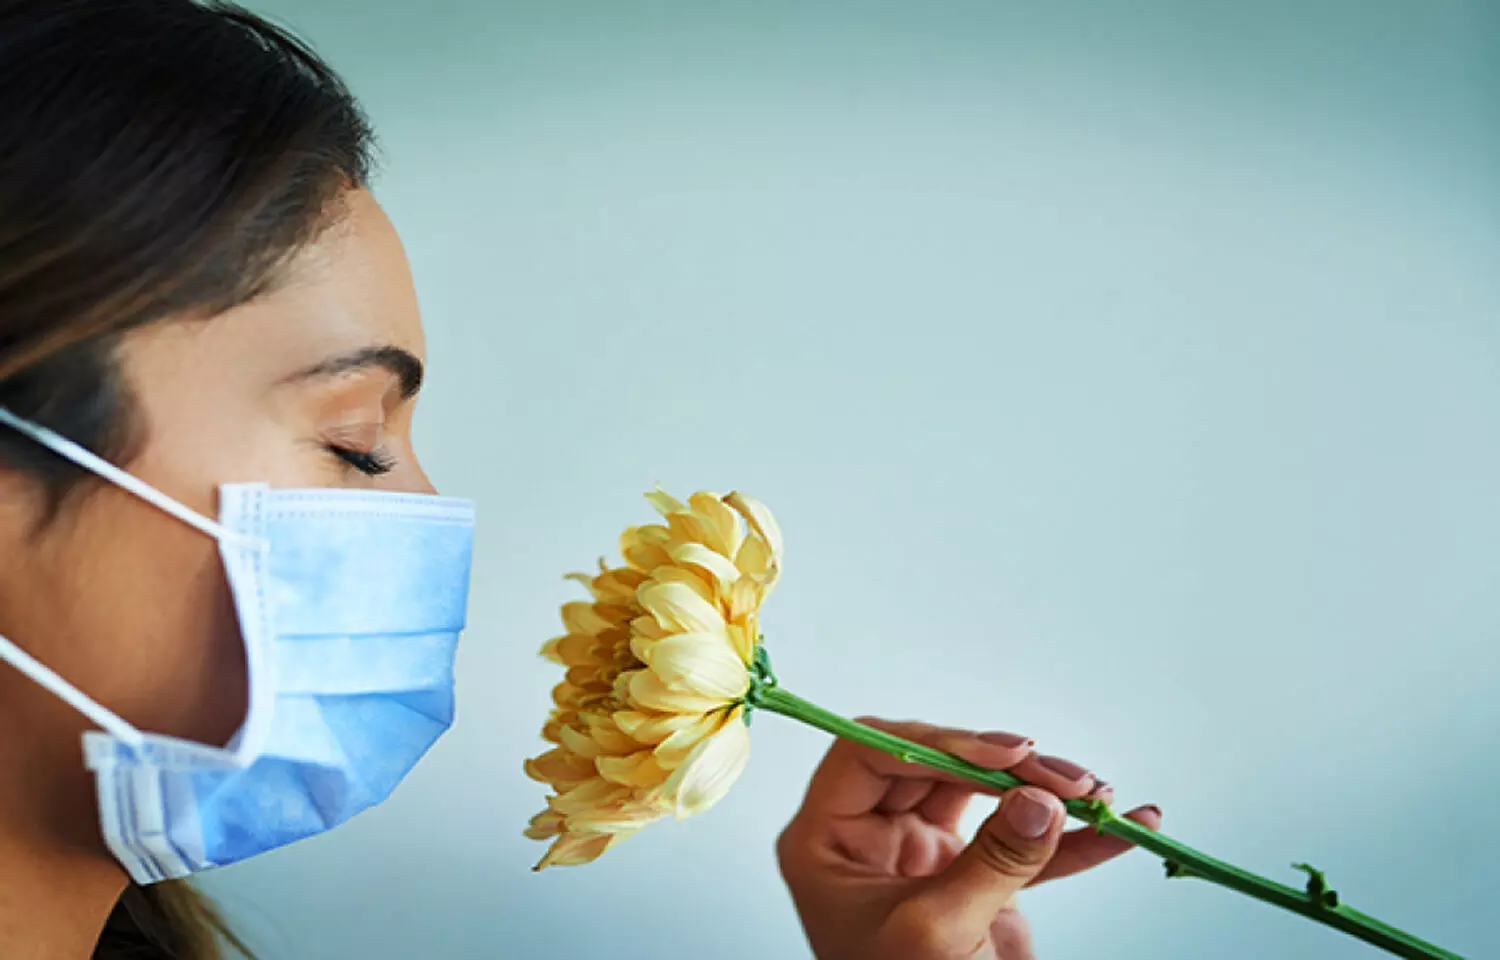 Best treatment for COVID-19 smell loss is smell training, not steroids, says study